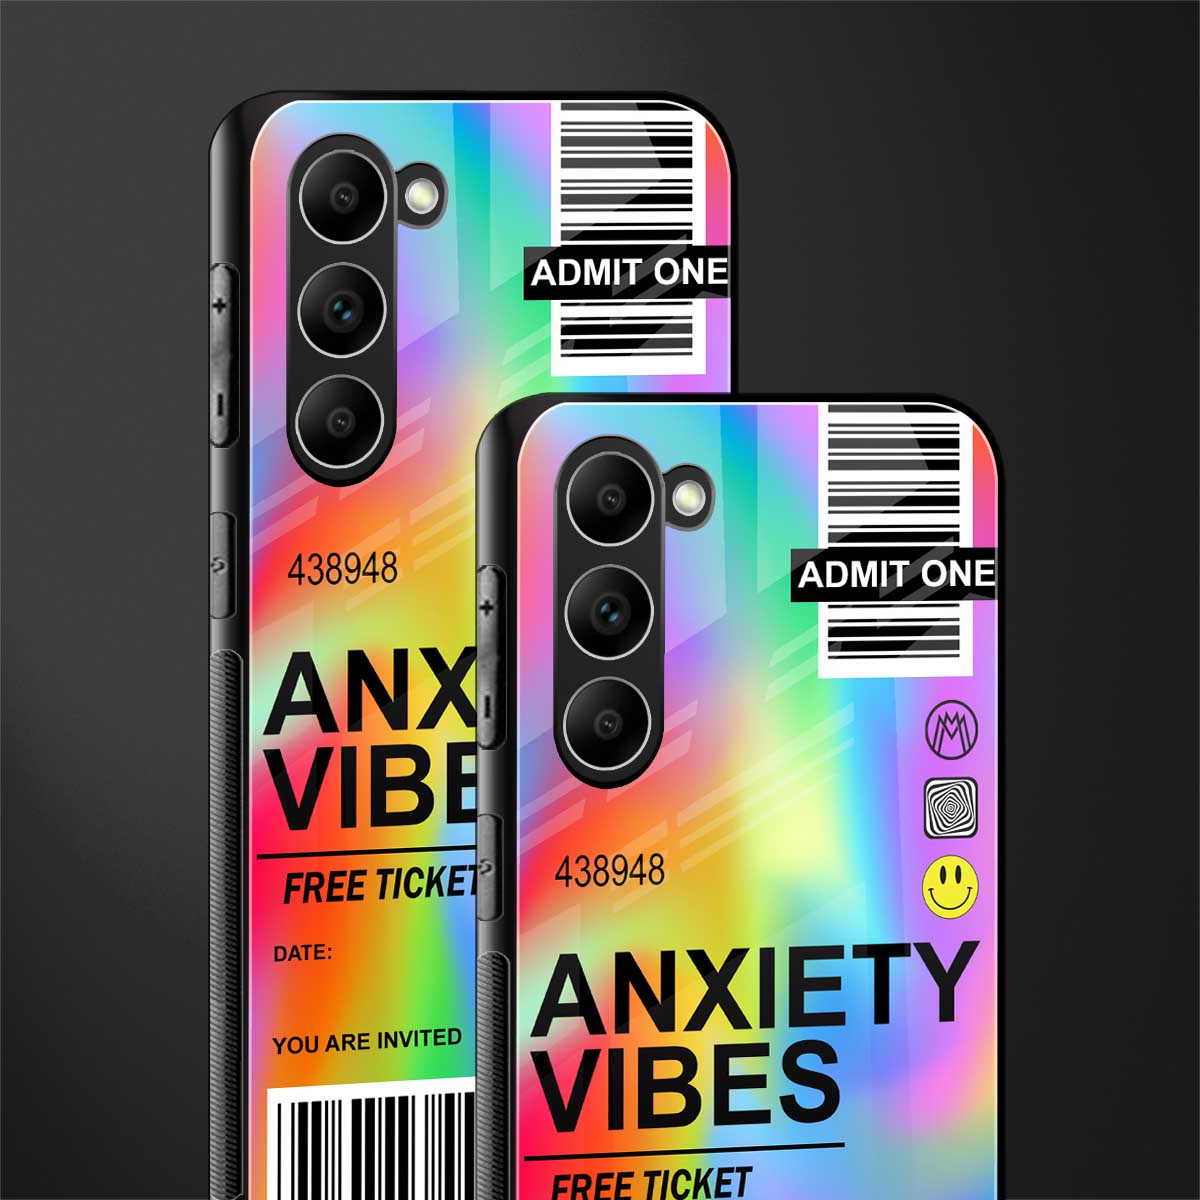 anxiety vibes glass case for phone case | glass case for samsung galaxy s23 plus